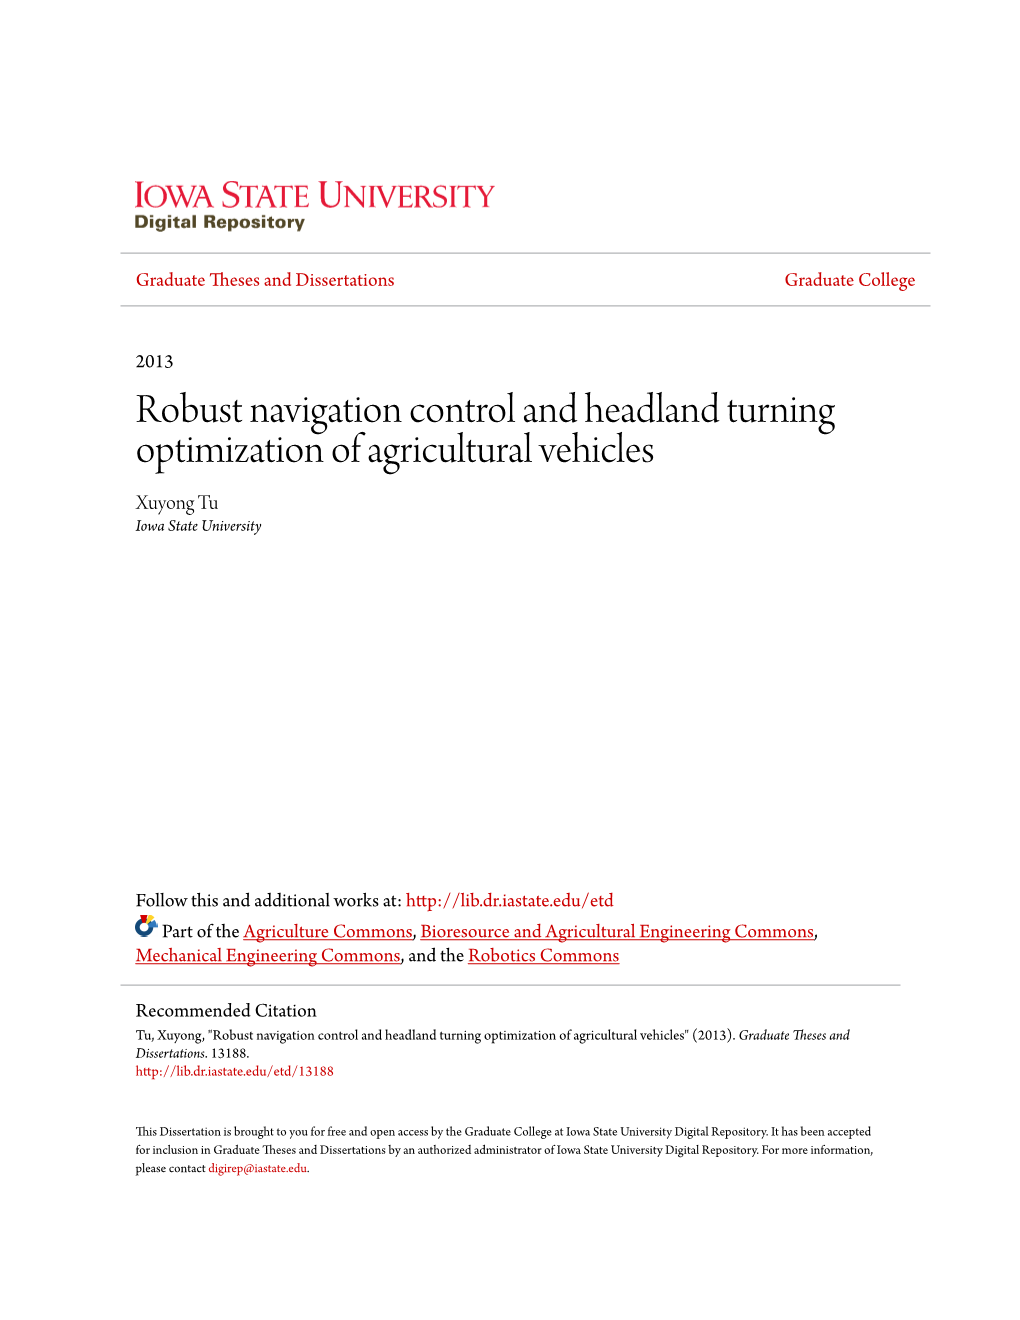 Robust Navigation Control and Headland Turning Optimization of Agricultural Vehicles Xuyong Tu Iowa State University